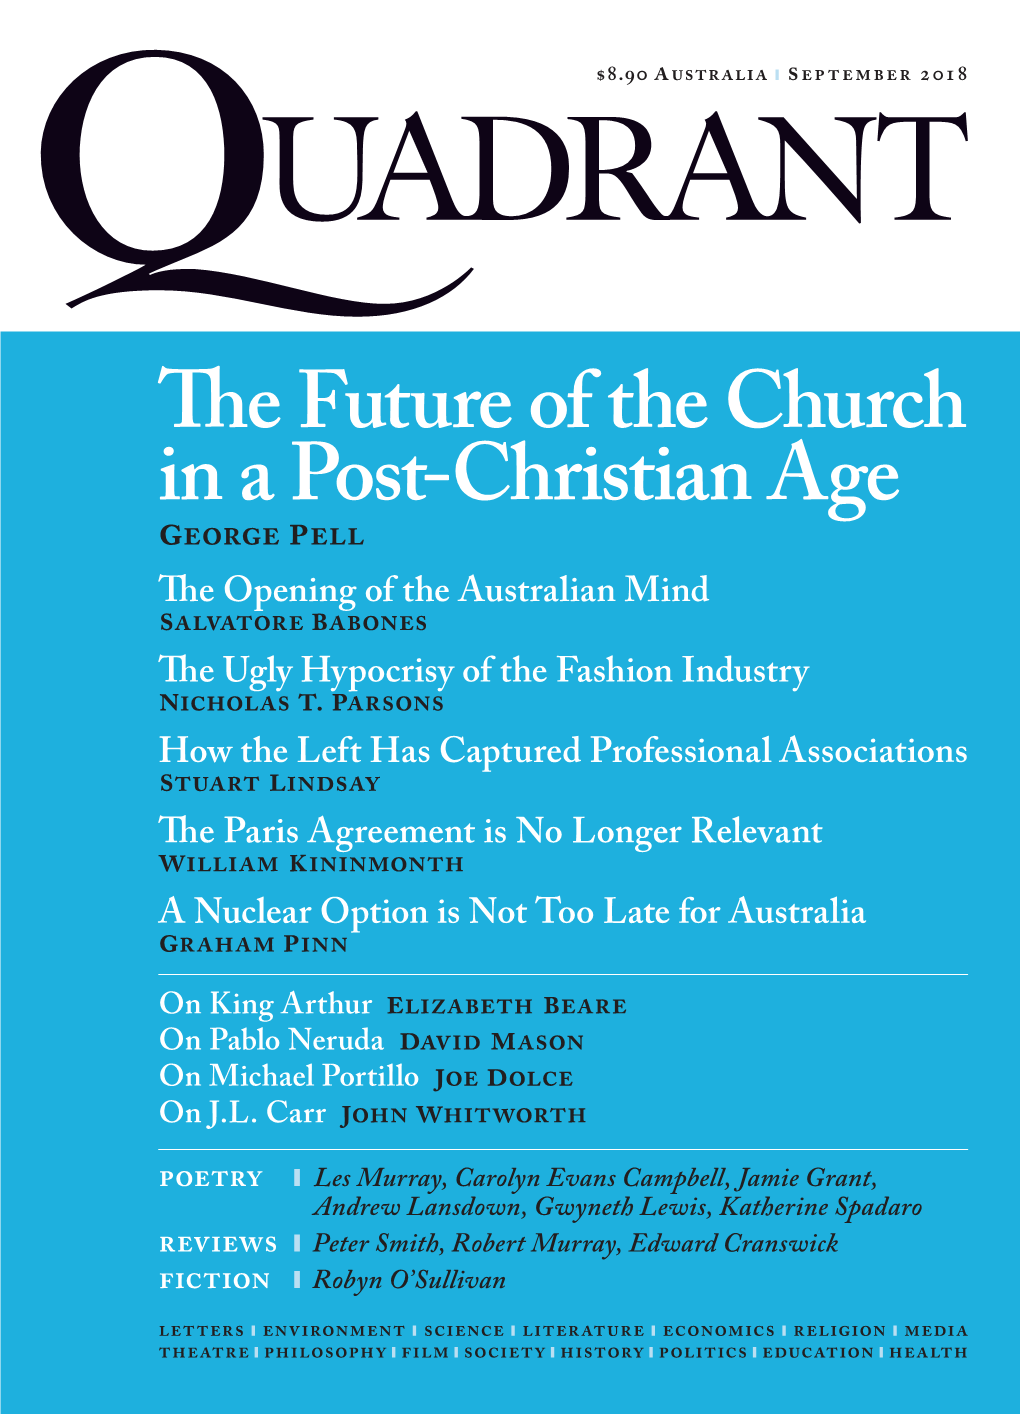 The Future of the Church in a Post-Christian